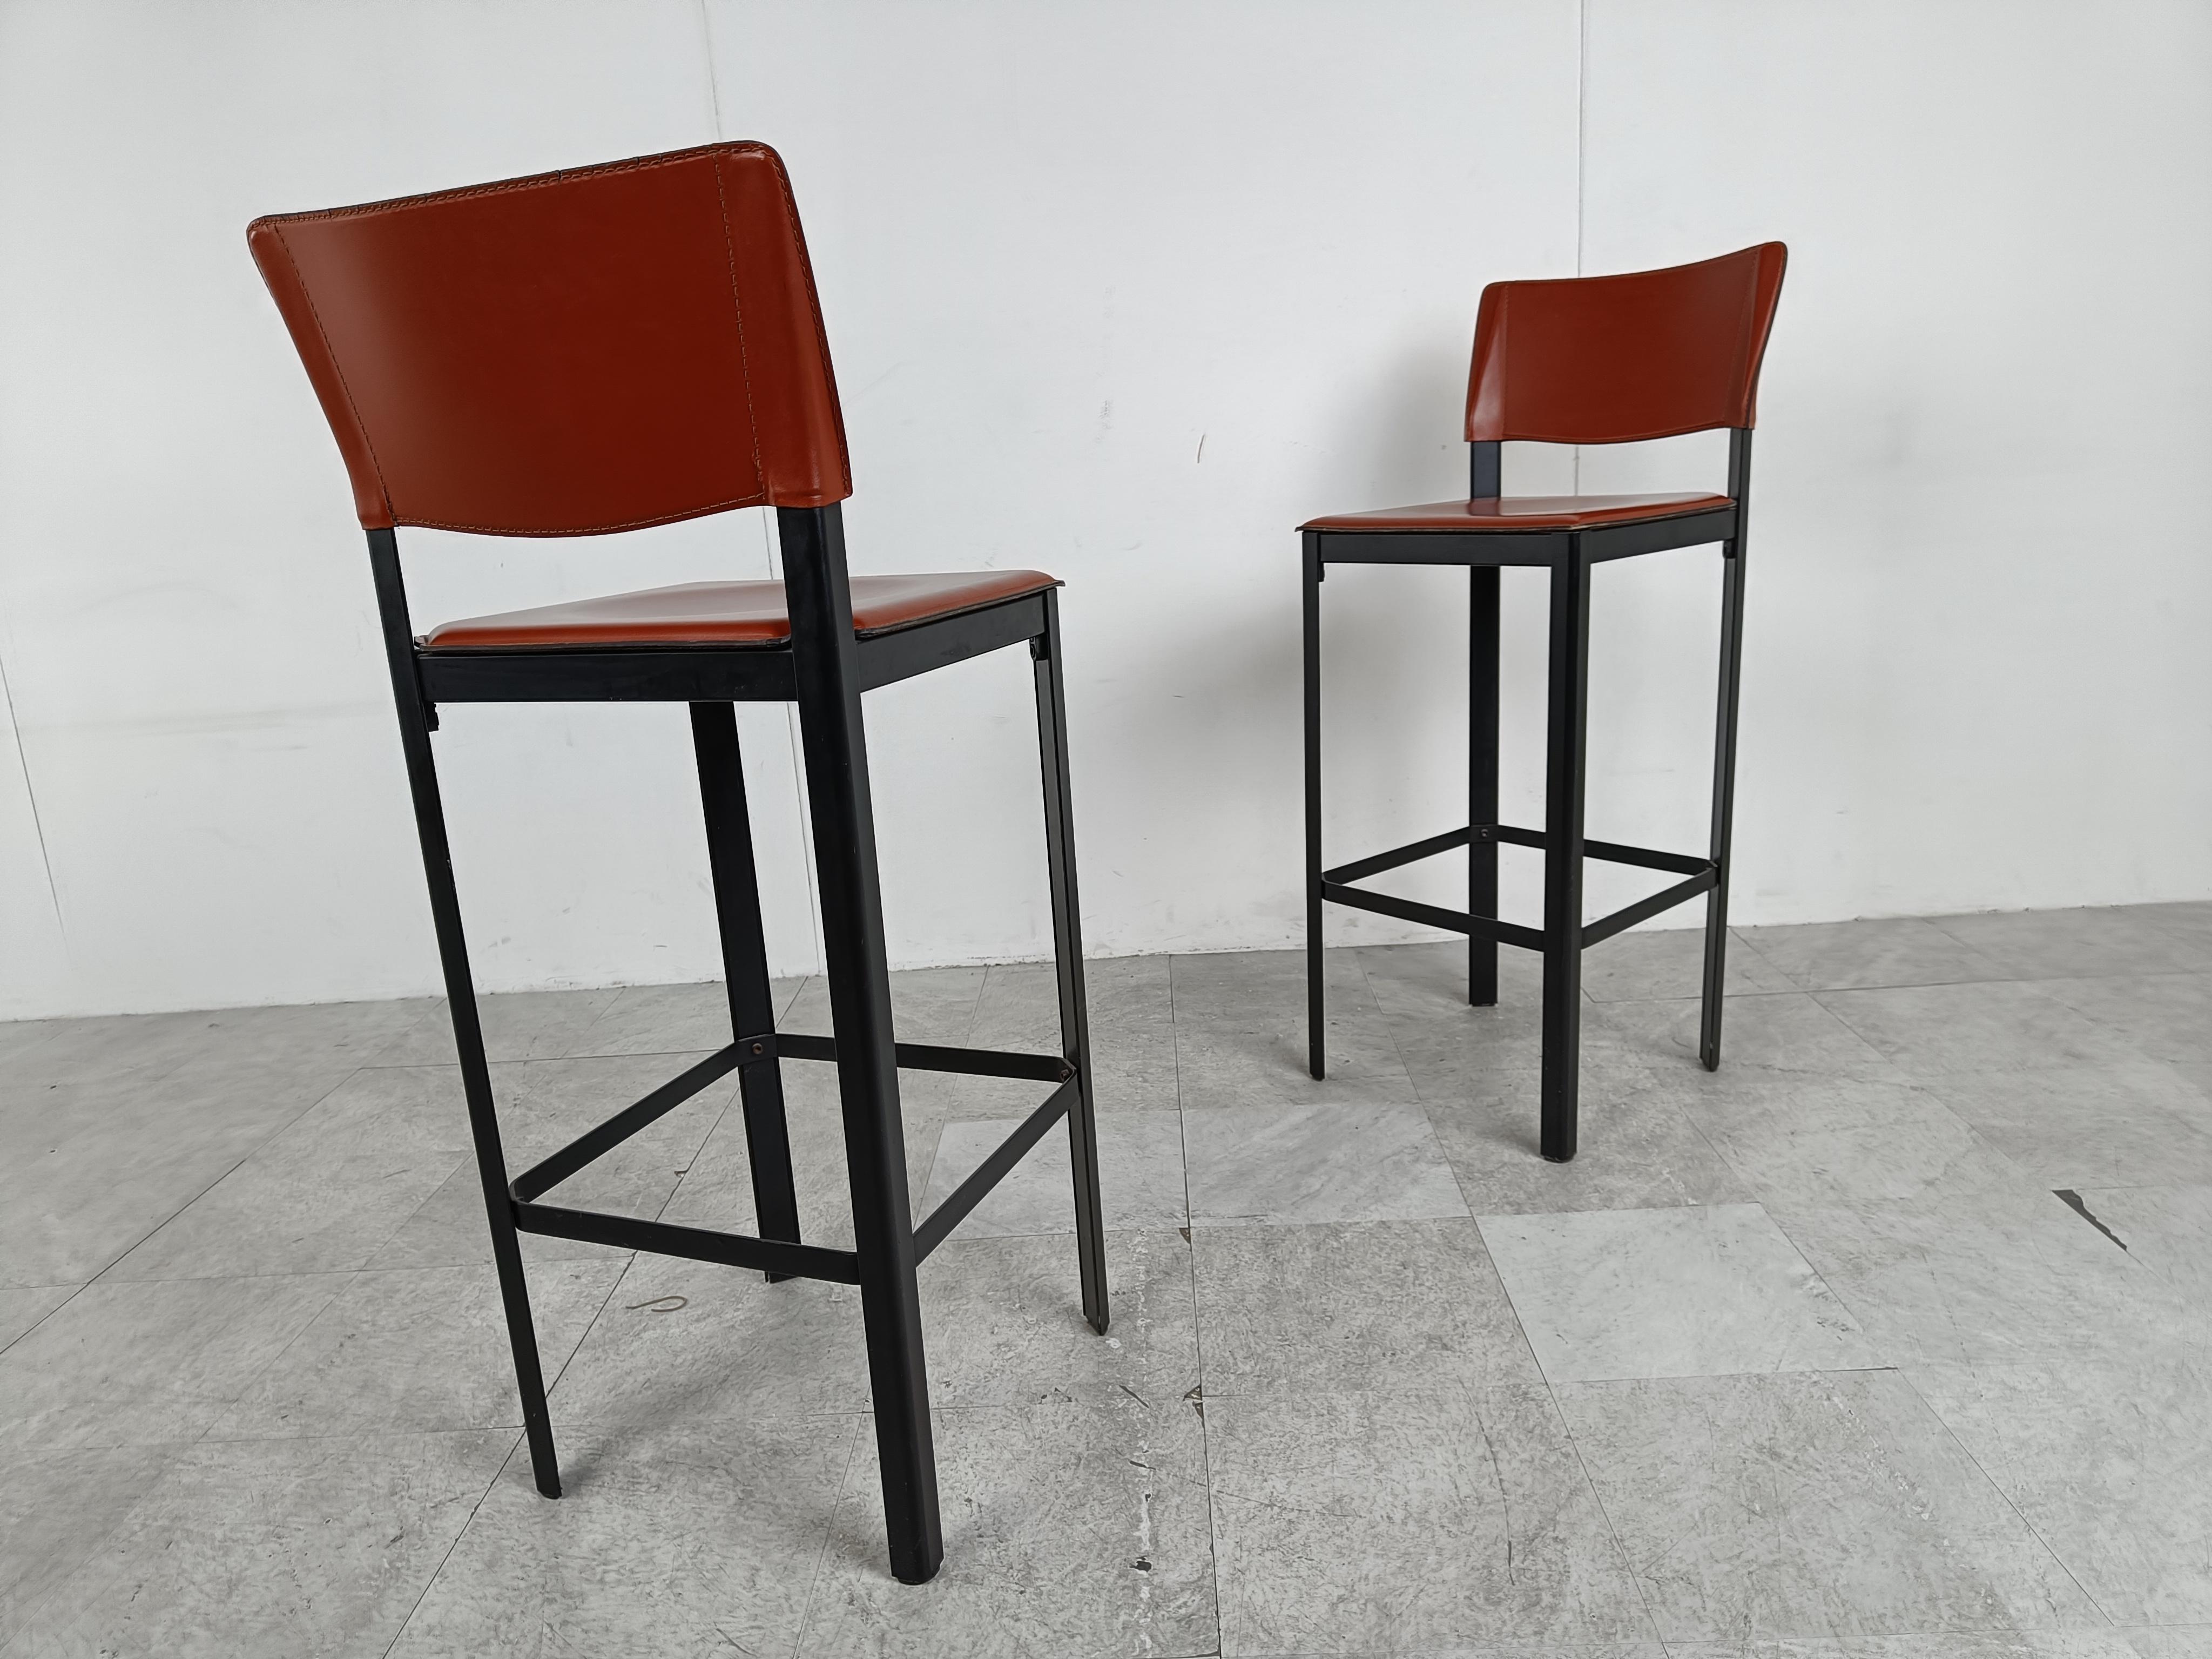 Set of 2 red leather and black metal bar stools by Matteo Grassi.

Condition: NOrmal wear and tear, very sturdy

Dimensions:
Height: 100cm/39.37